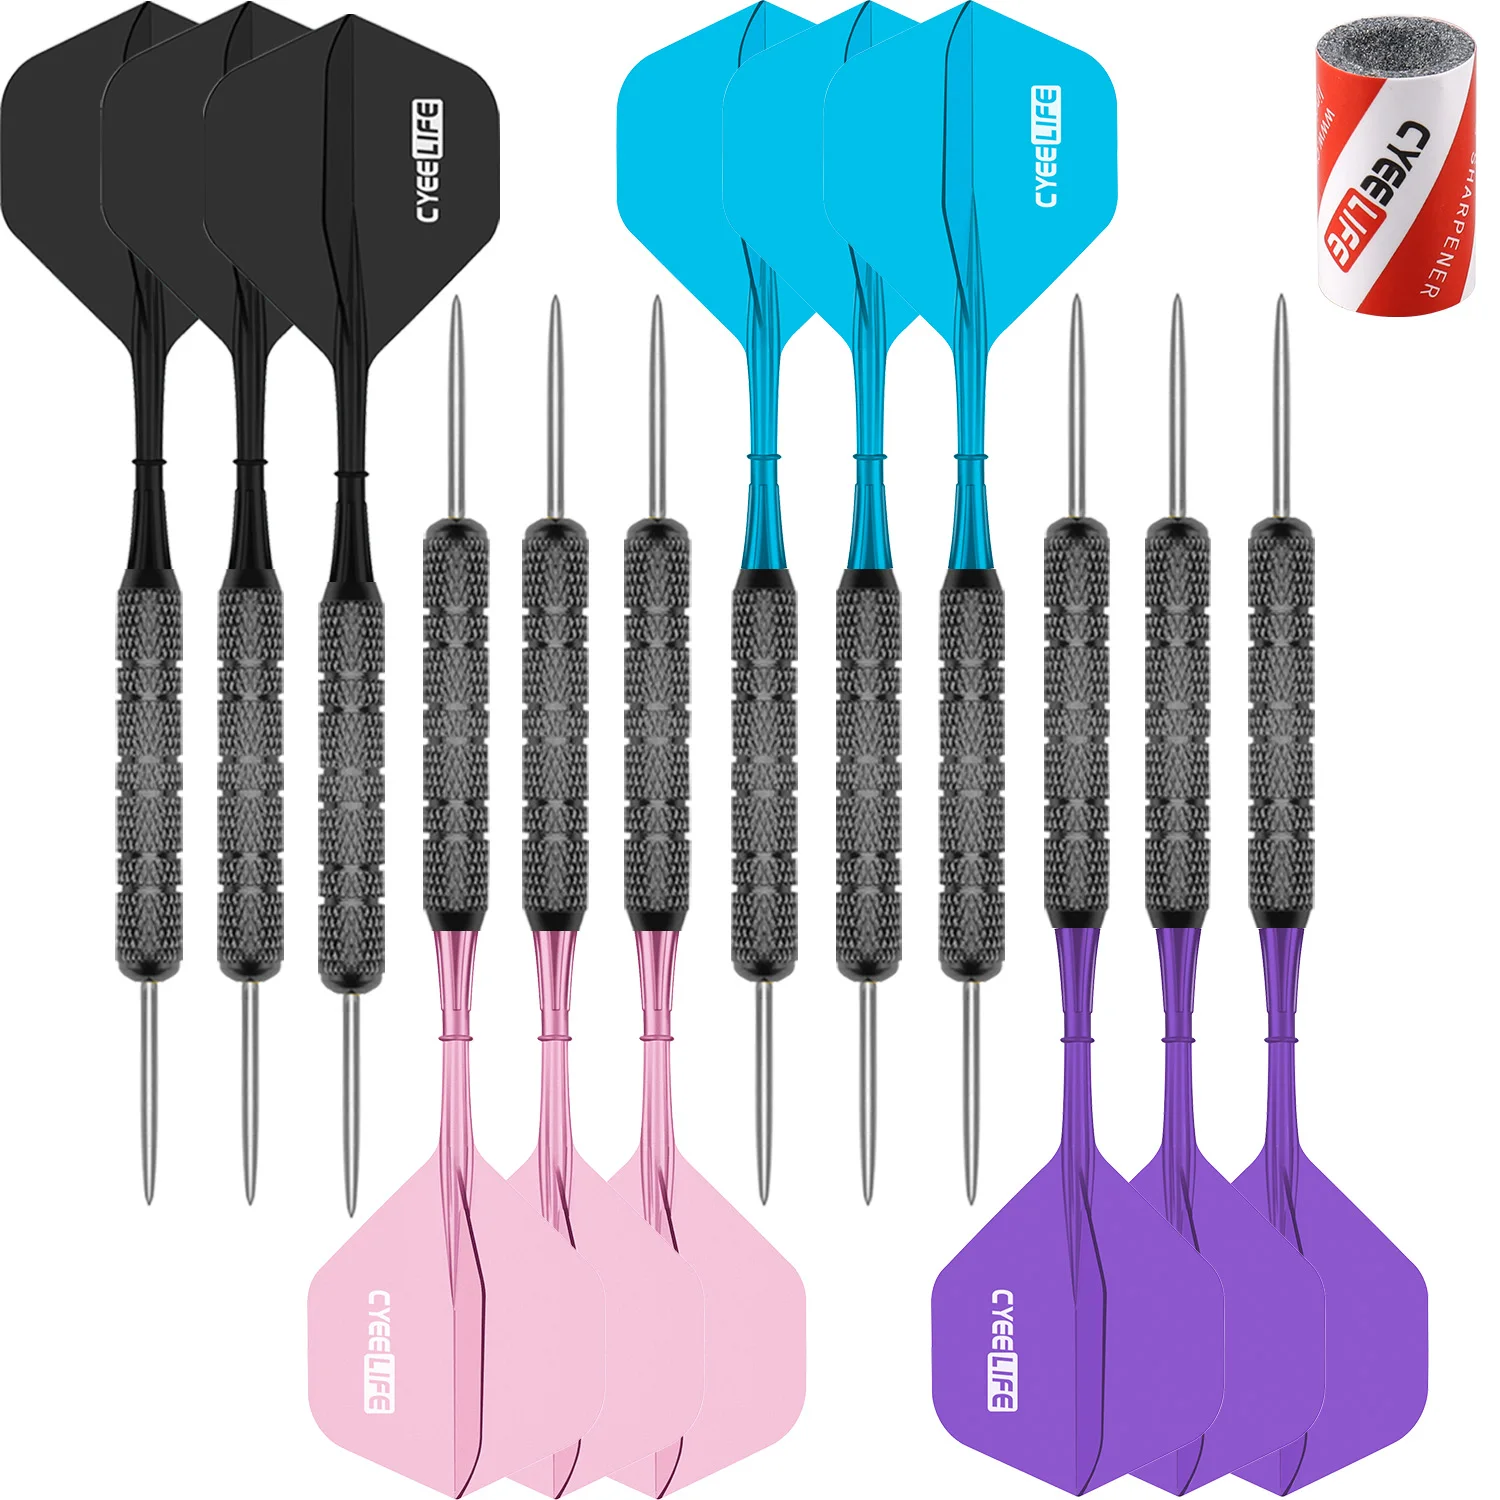 

CyeeLife 20g 12 Pack Colorful Integrated Shaft and Flight with Dart Sharpener Steel Tip Darts Set, Muti color